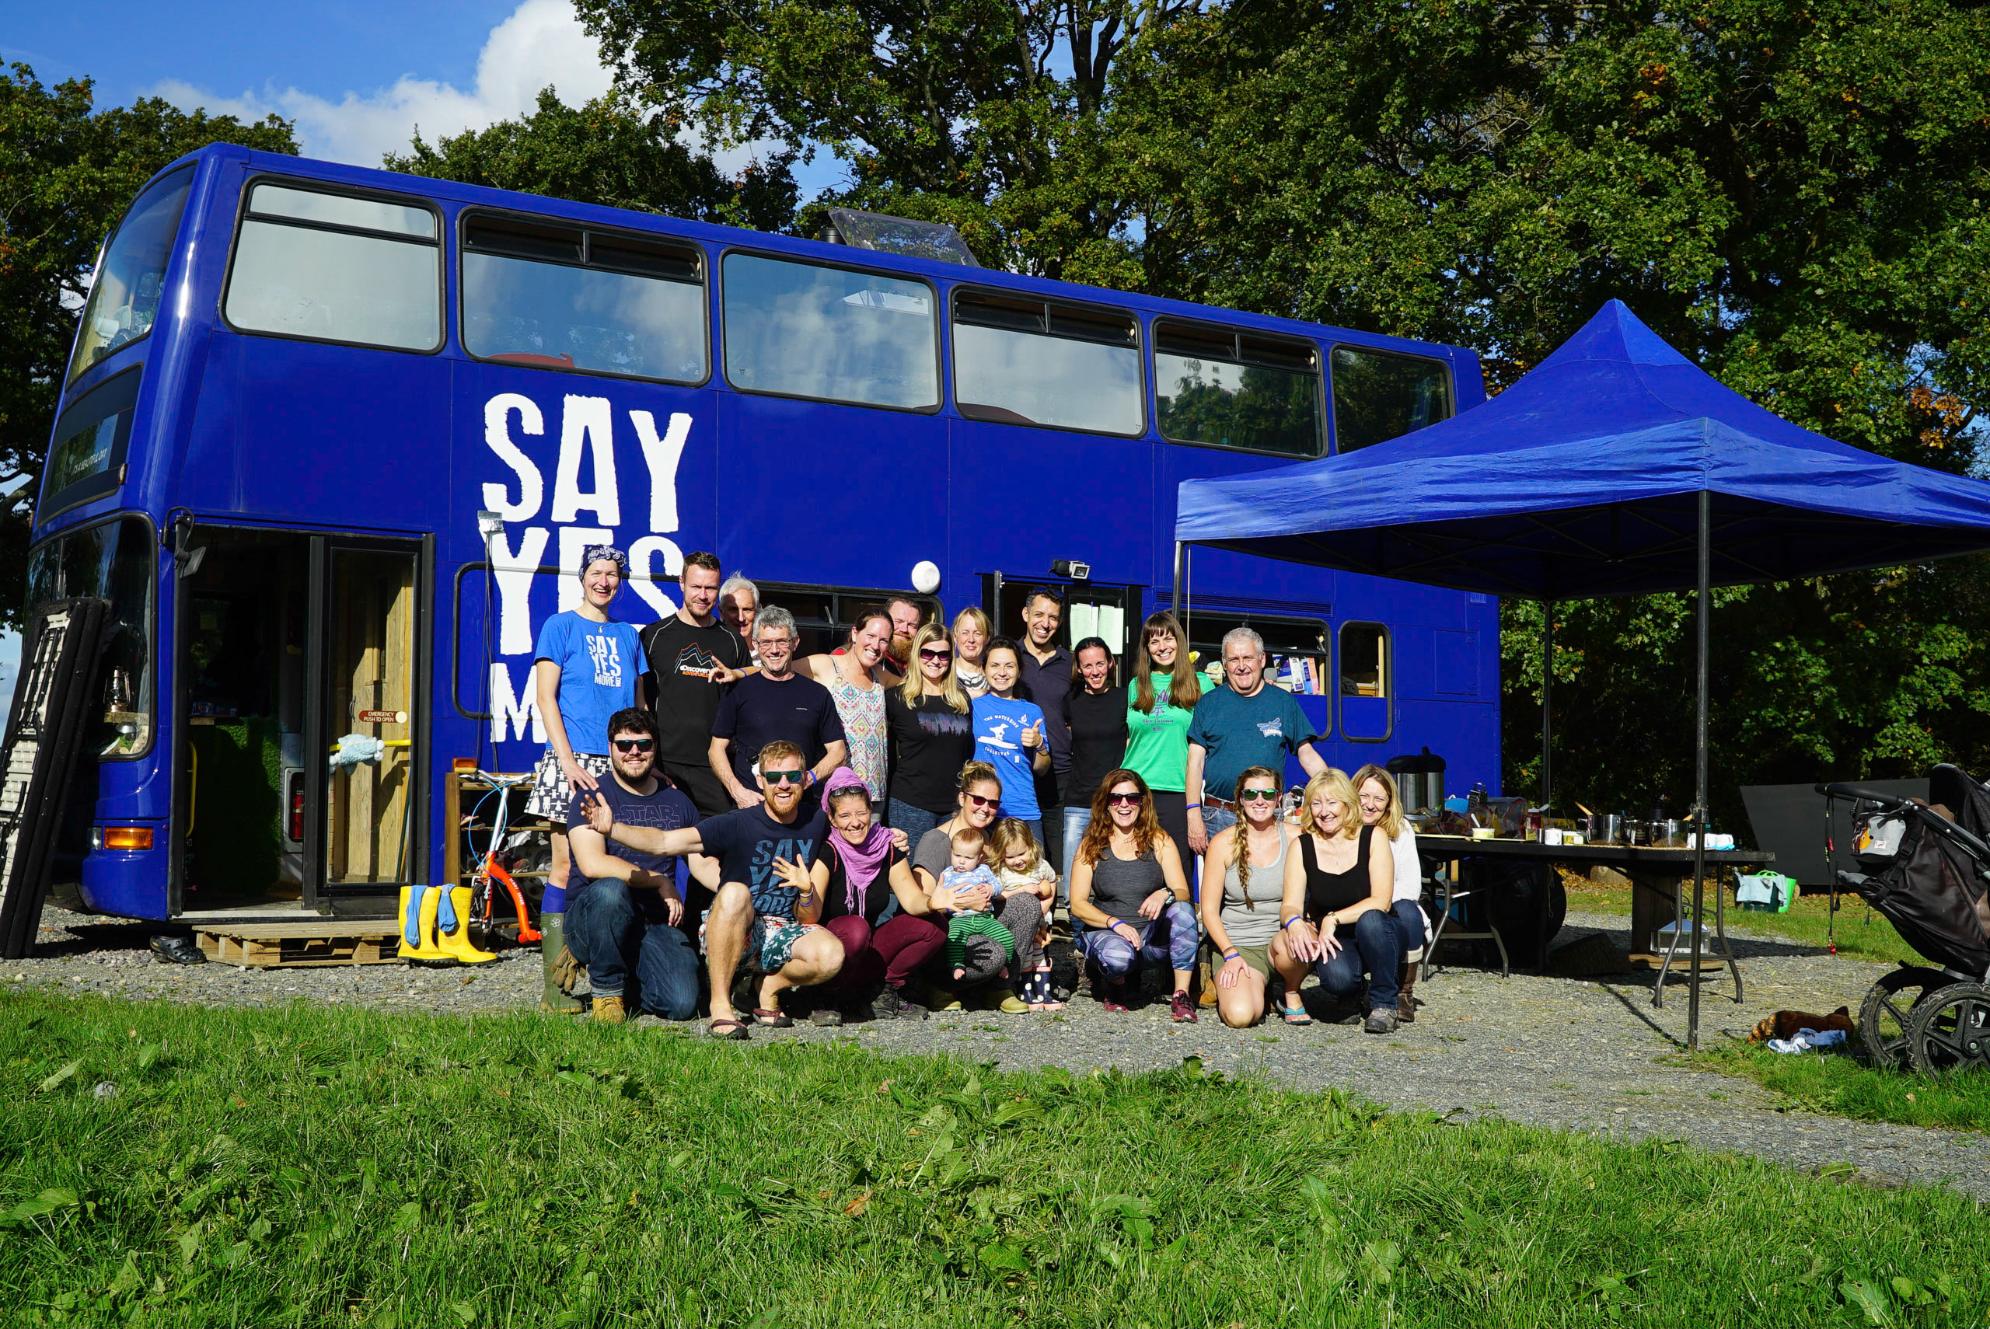 Members of the Yes Tribe pose at one of their events. Photo: Yes Tribe/Dave Cornthwaite.